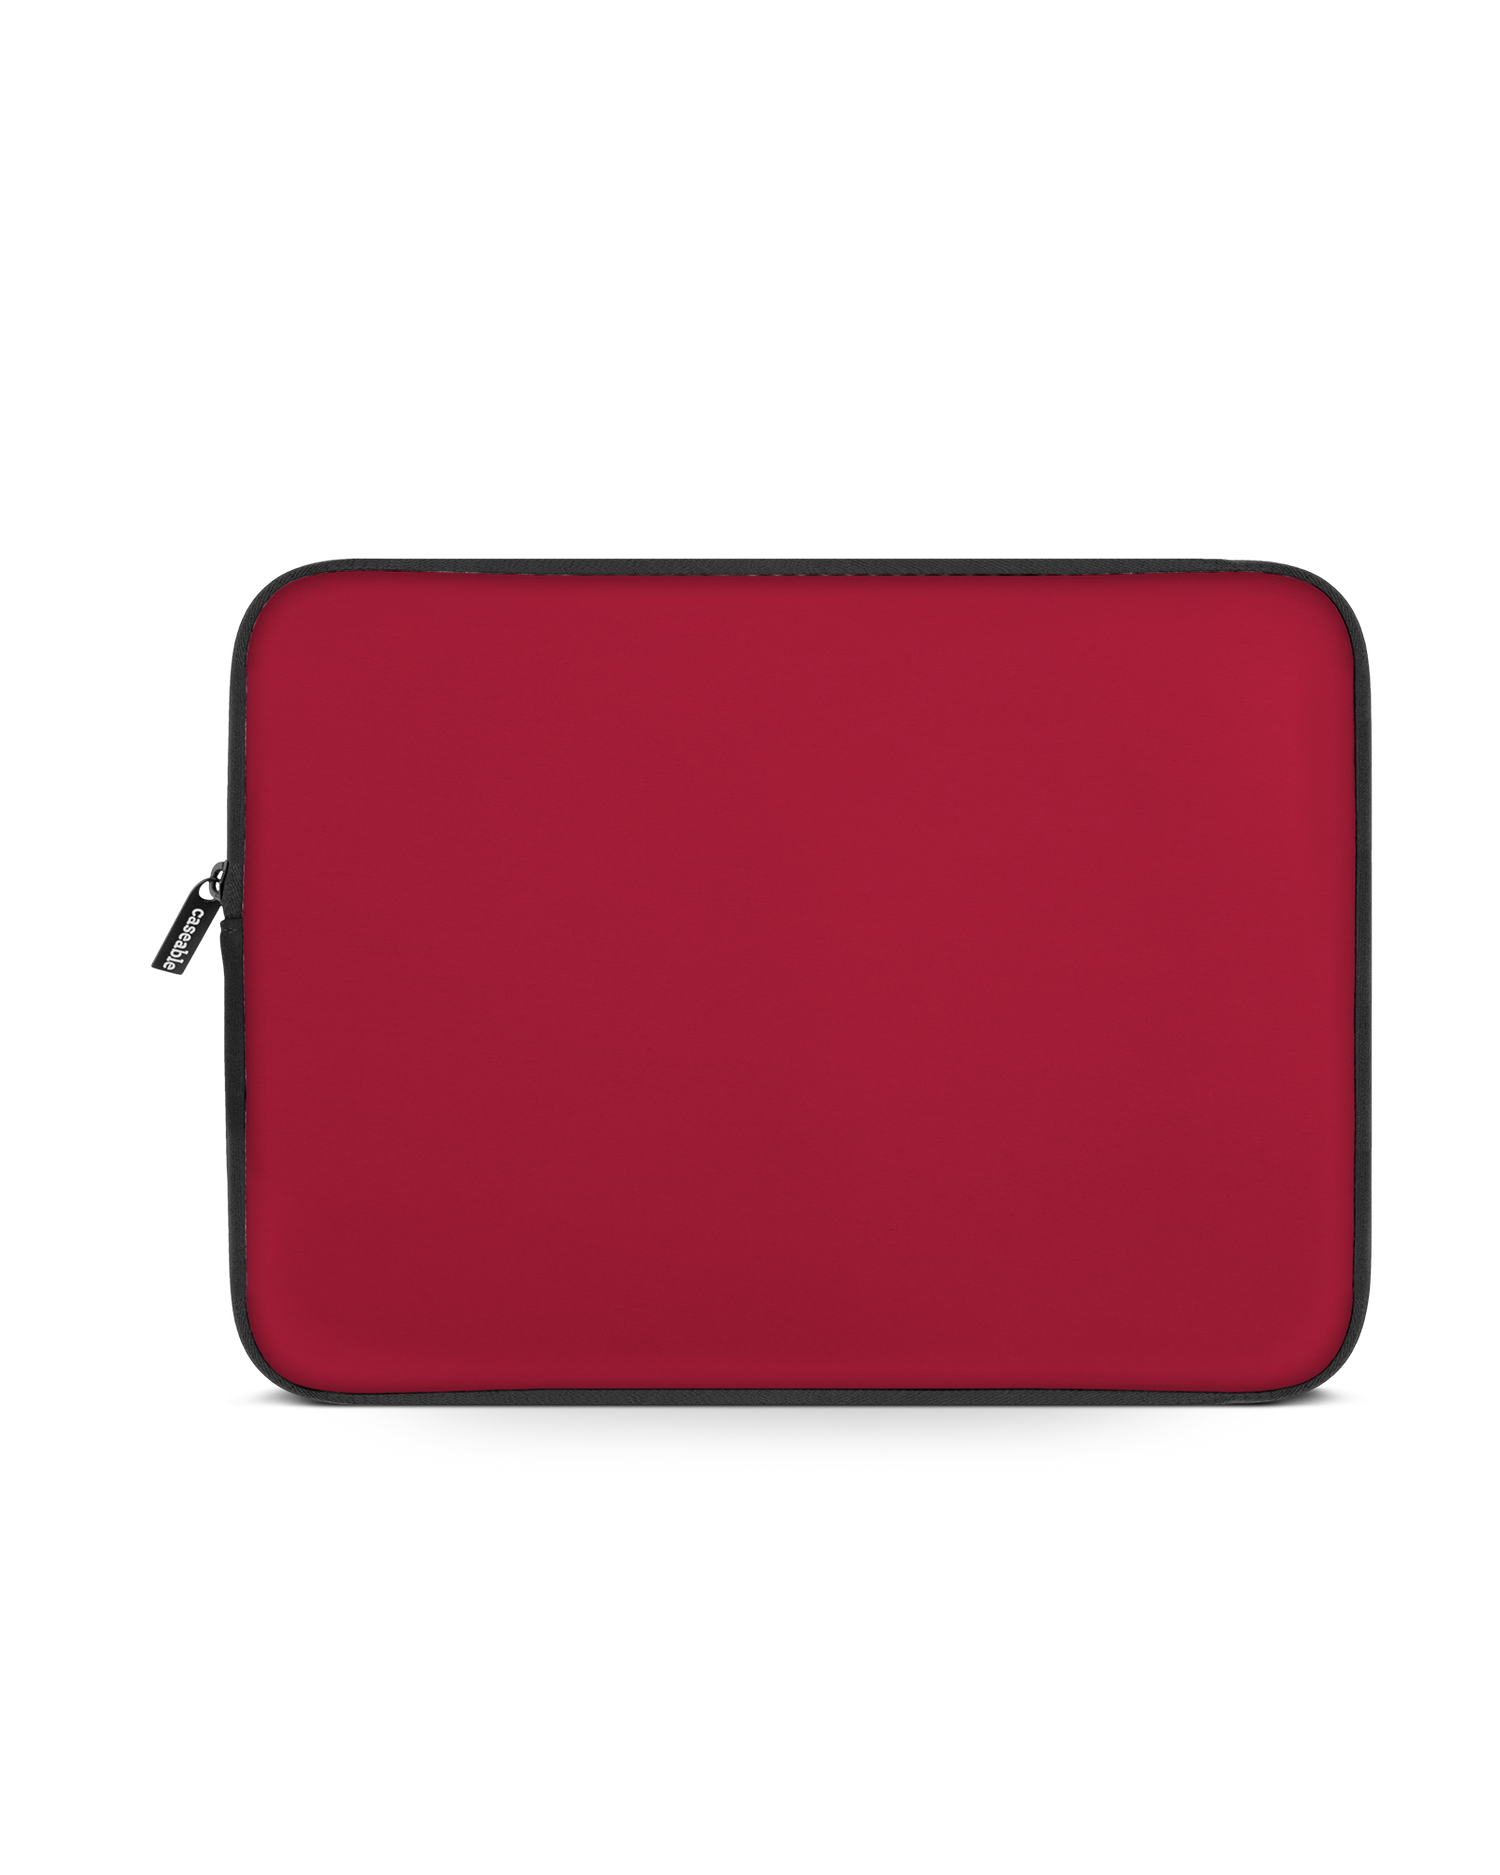 RED Laptop Case 13 inch: Front View